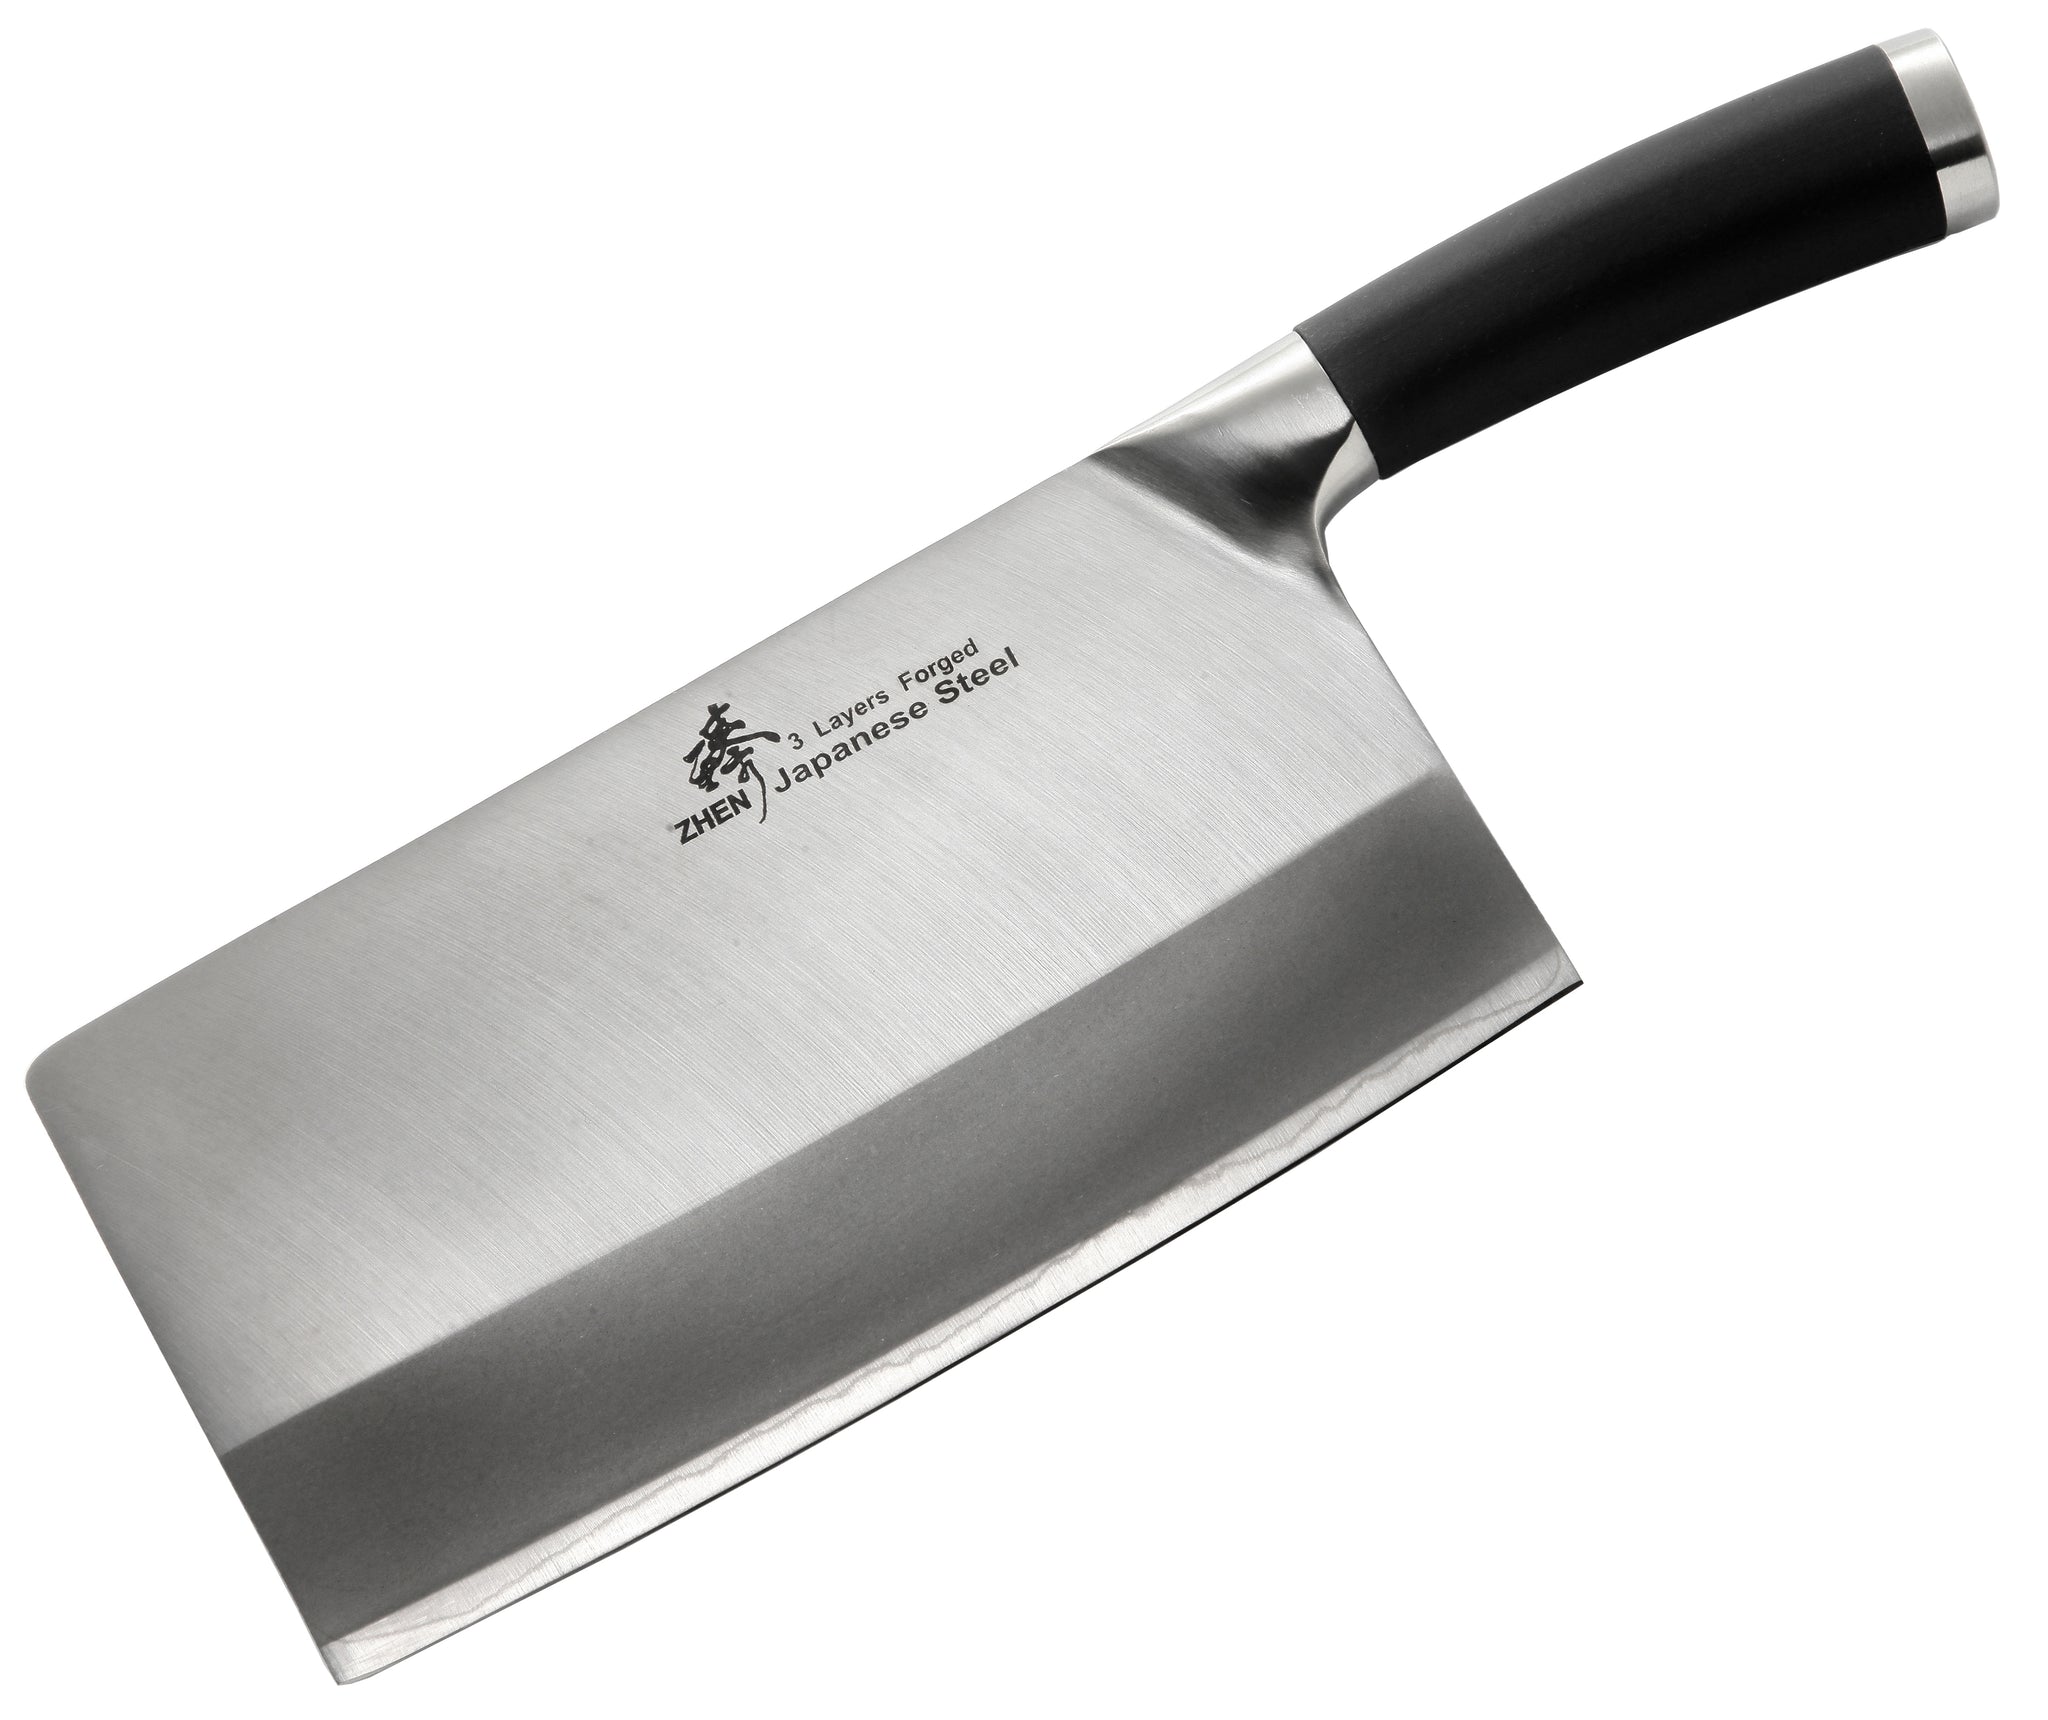 3-Layer Forged Heavy-Duty Cleaver 8-inch, TPR – ZHEN Premium Knife